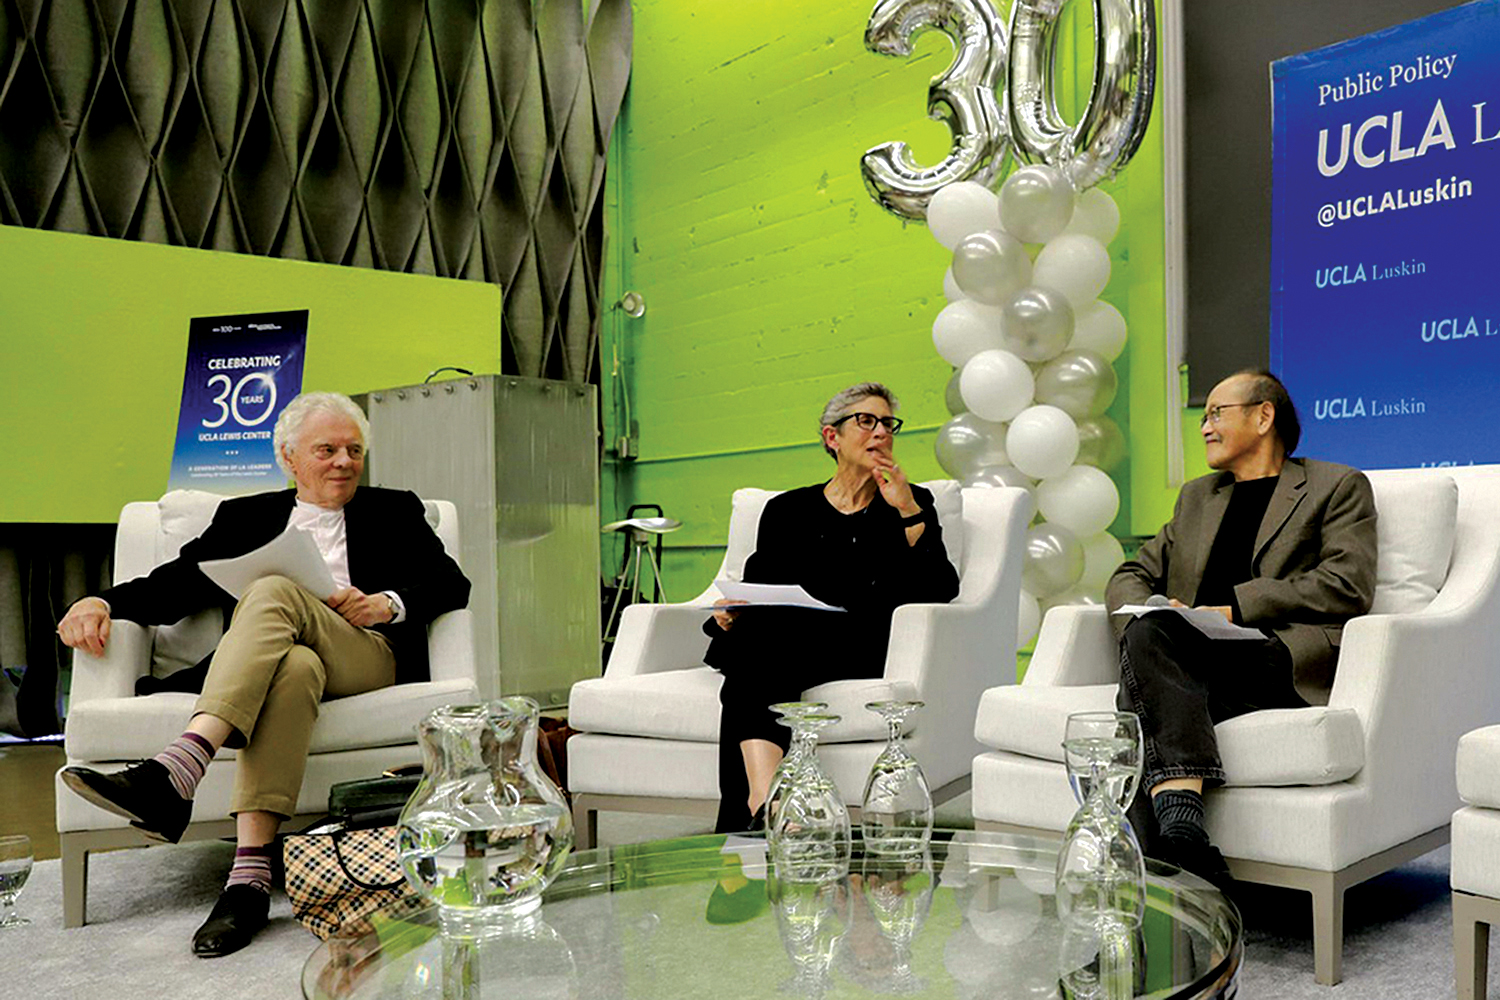 two men and a woman sit in large white chairs and talk